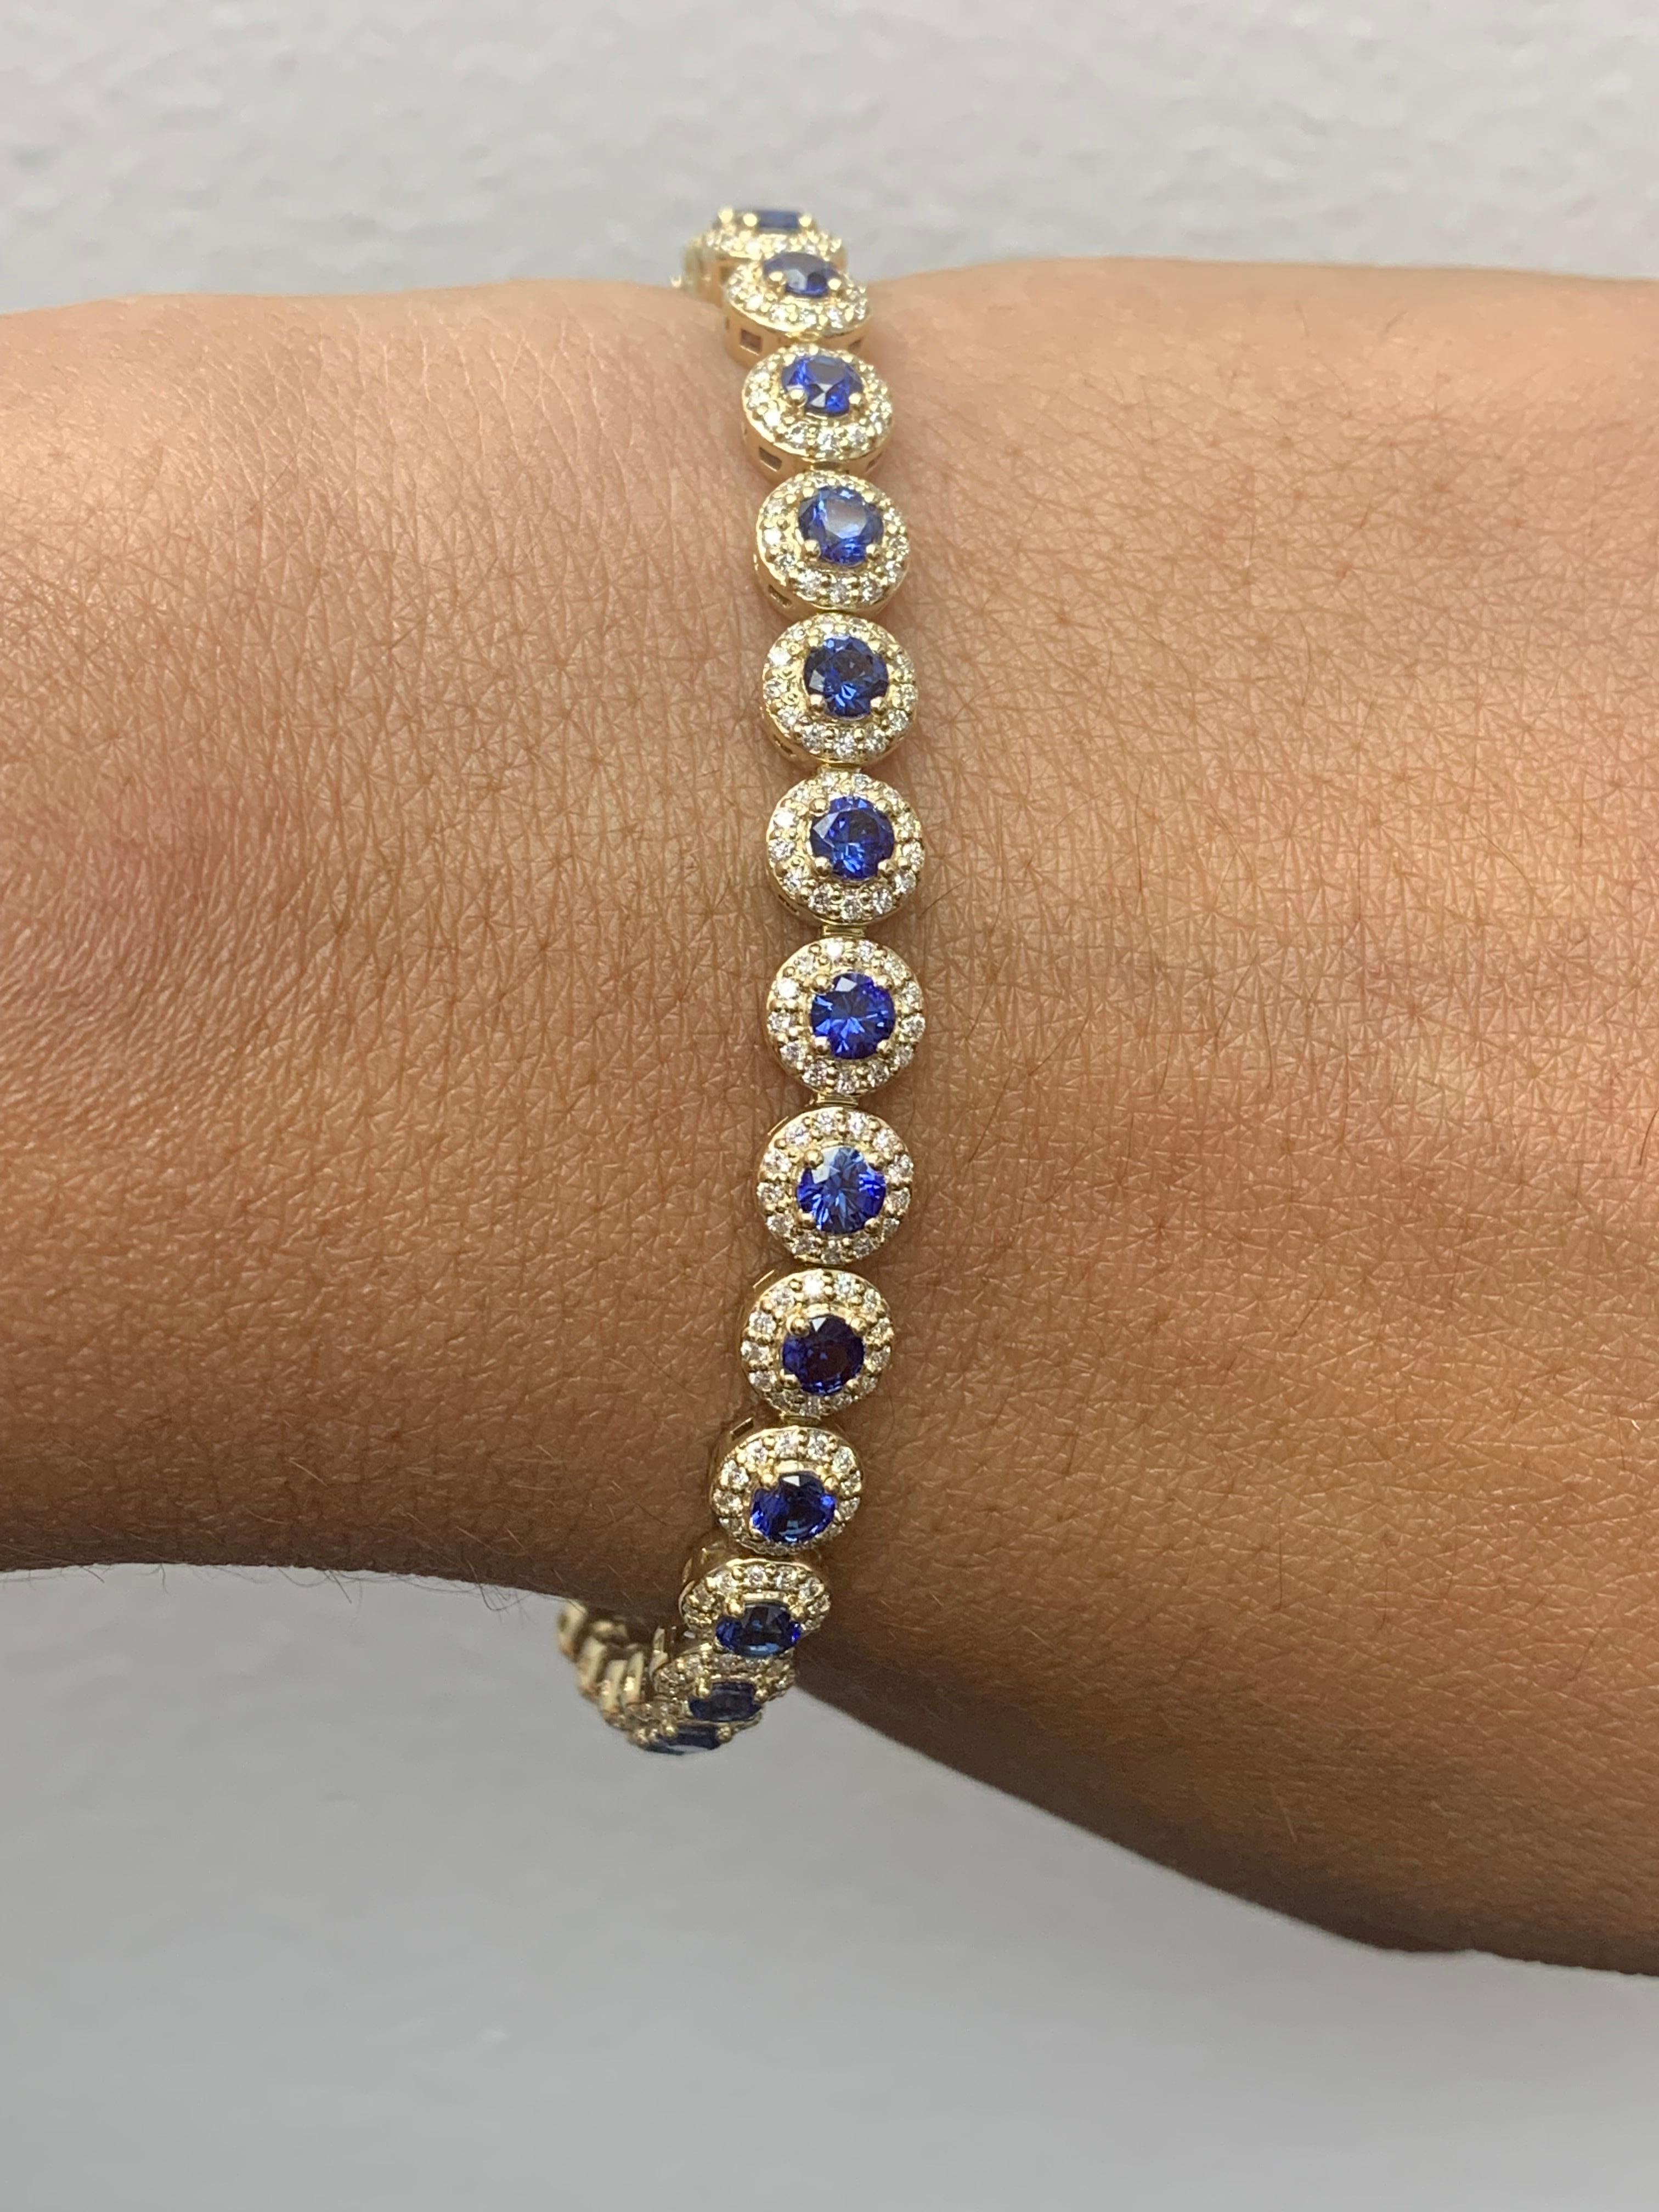 Modern 4.67 Carat Round Cut Sapphire and Diamond Tennis Bracelet in 14K Yellow Gold For Sale